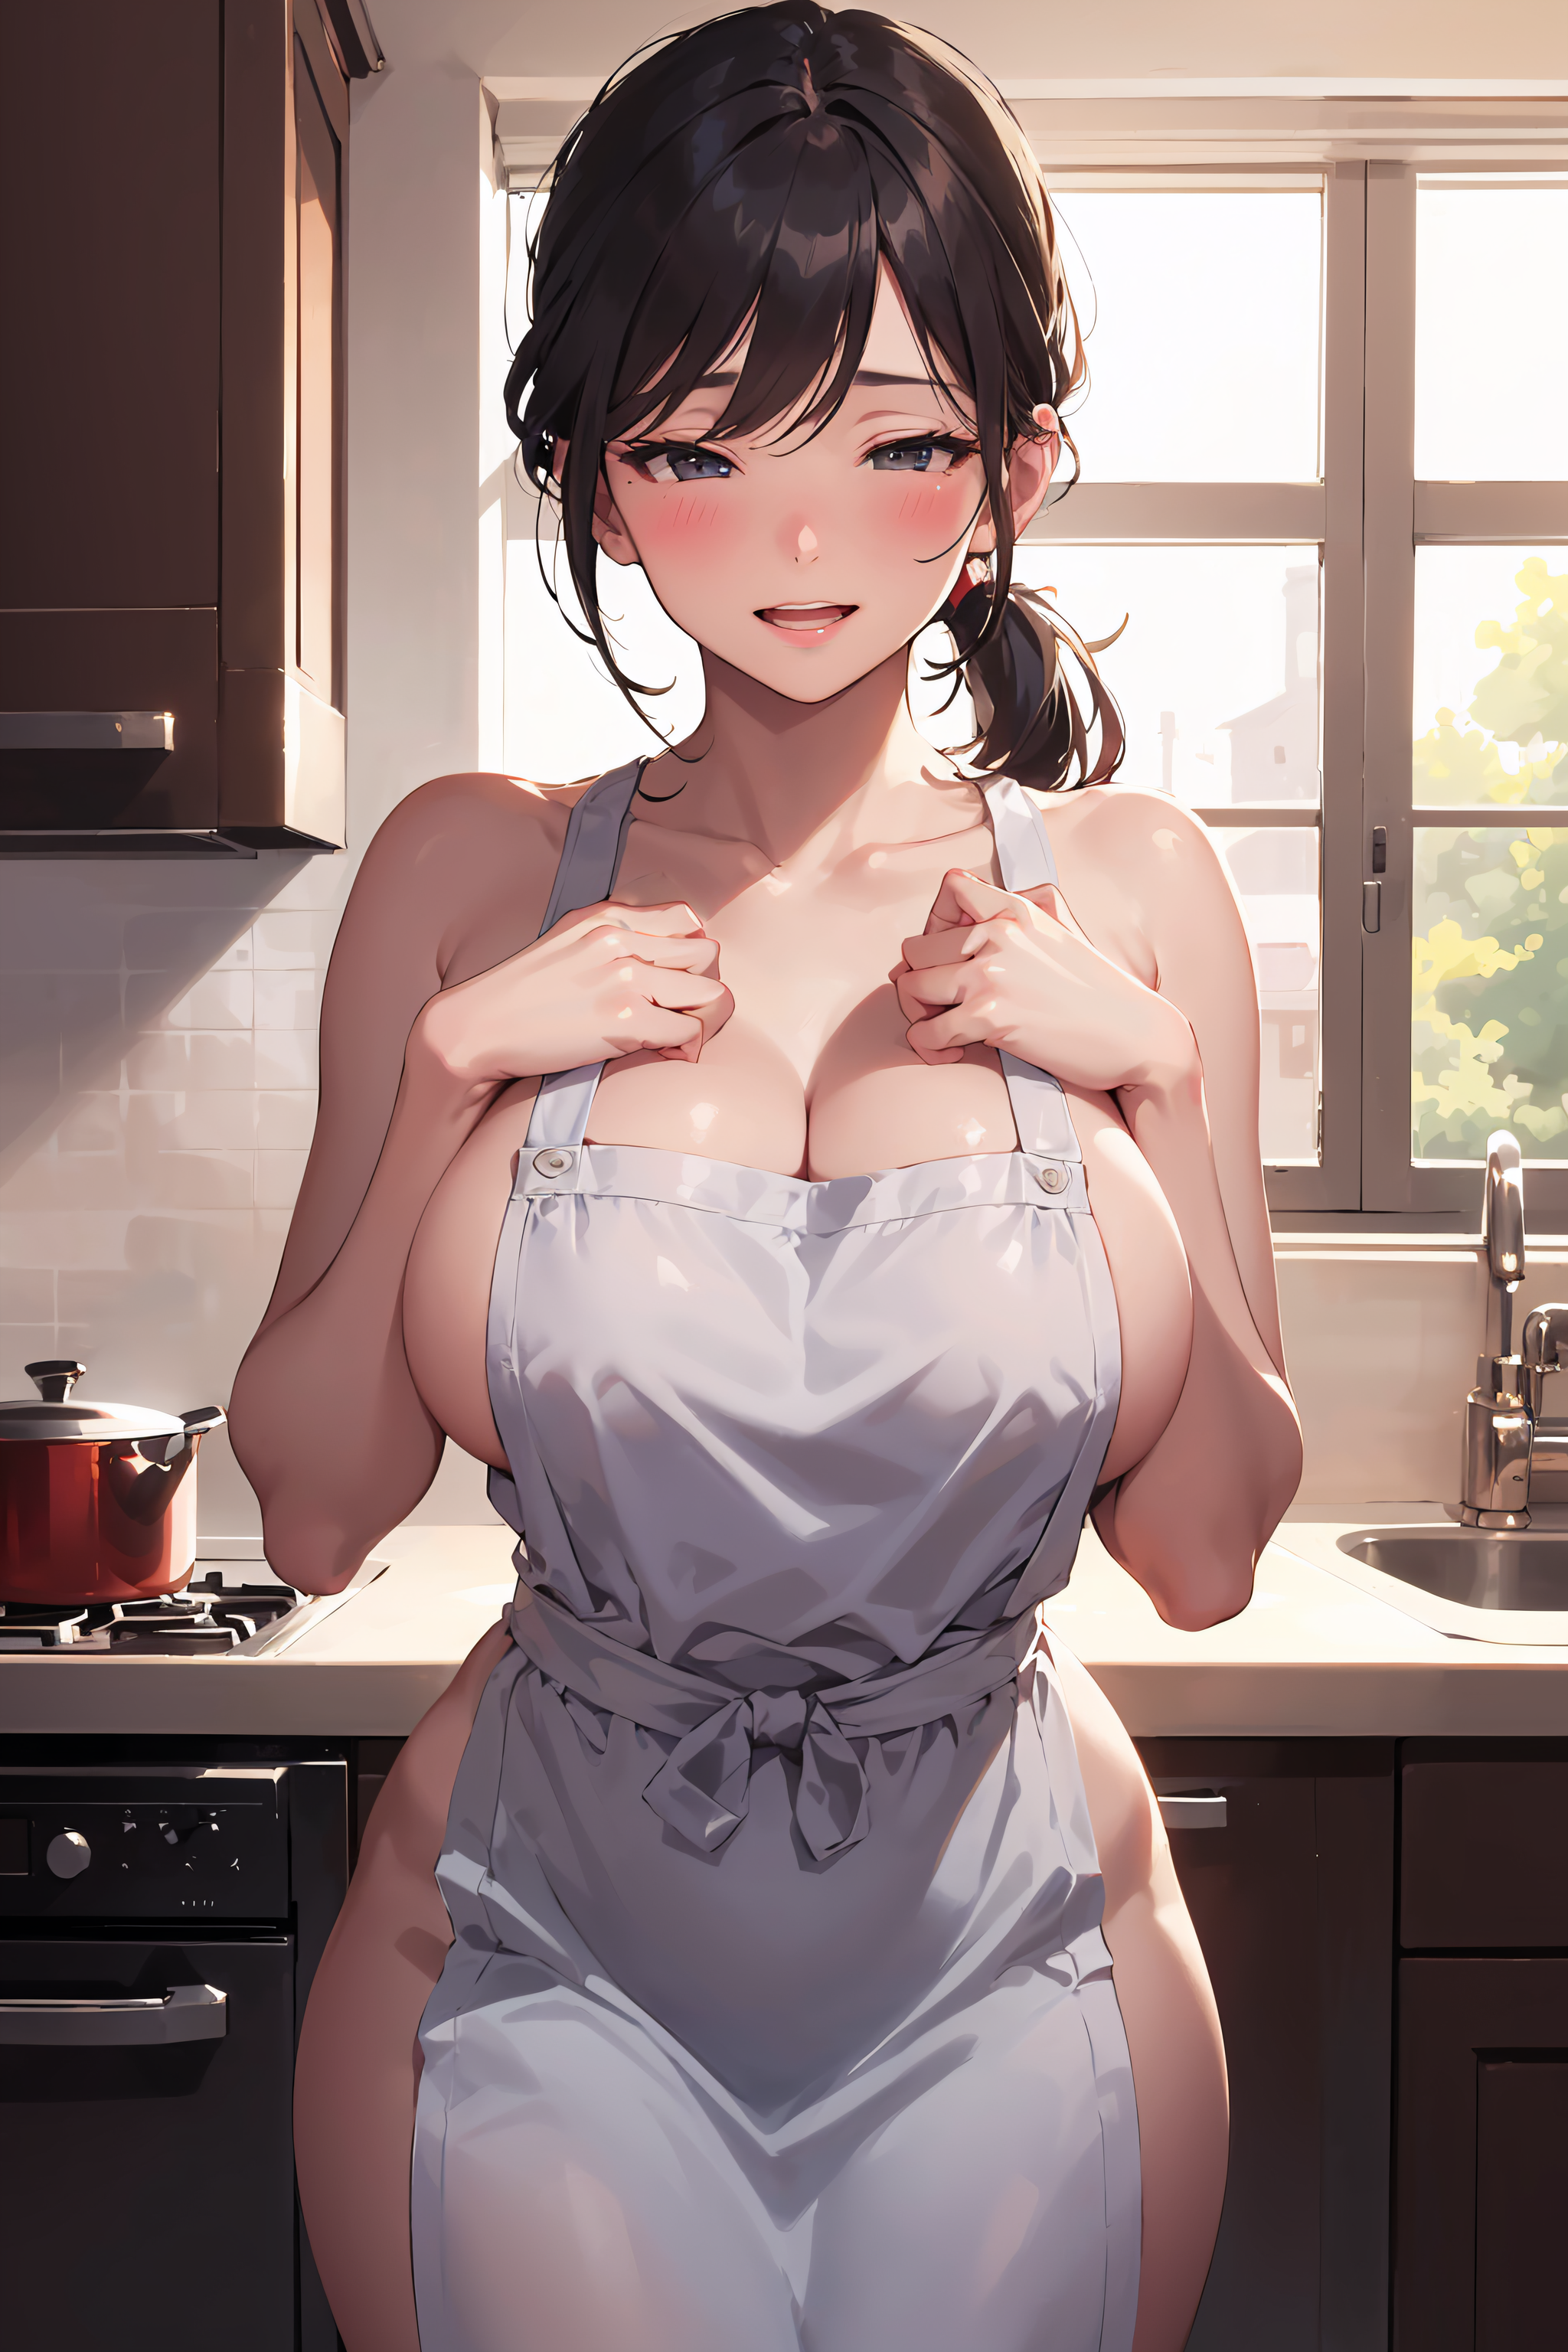 Anime 2048x3072 panwho AI art big boobs naked apron kitchen looking at viewer anime girls digital art sideboob cleavage thighs portrait display window sunlight blushing cabinets sink standing